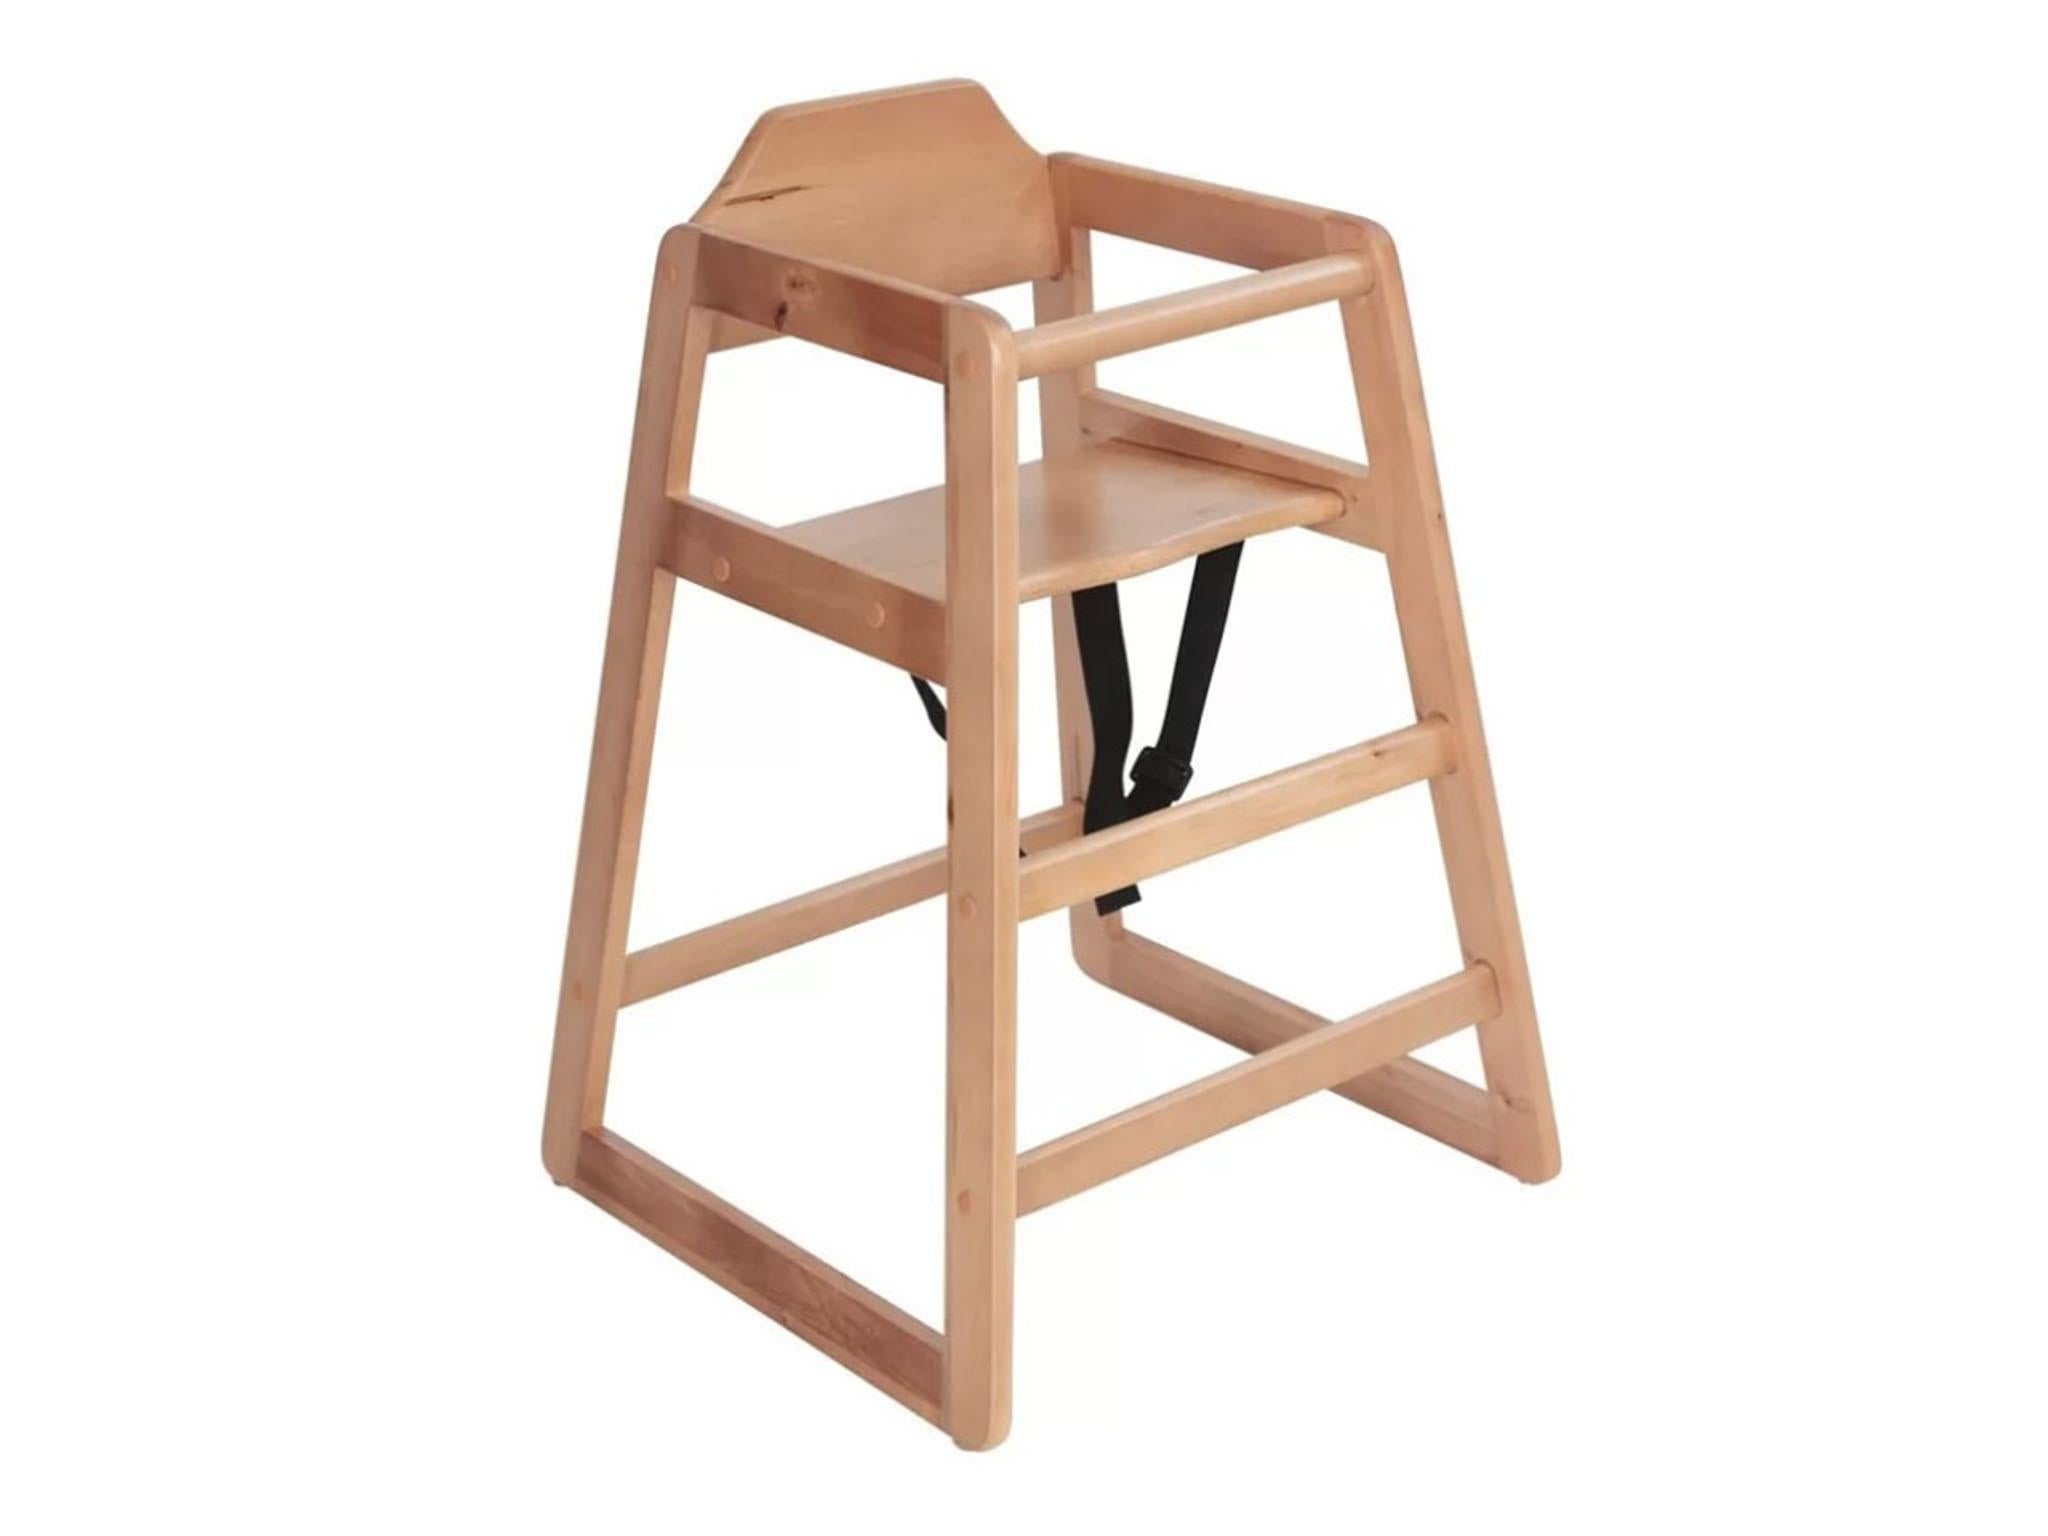 12 Best Highchairs The Independent